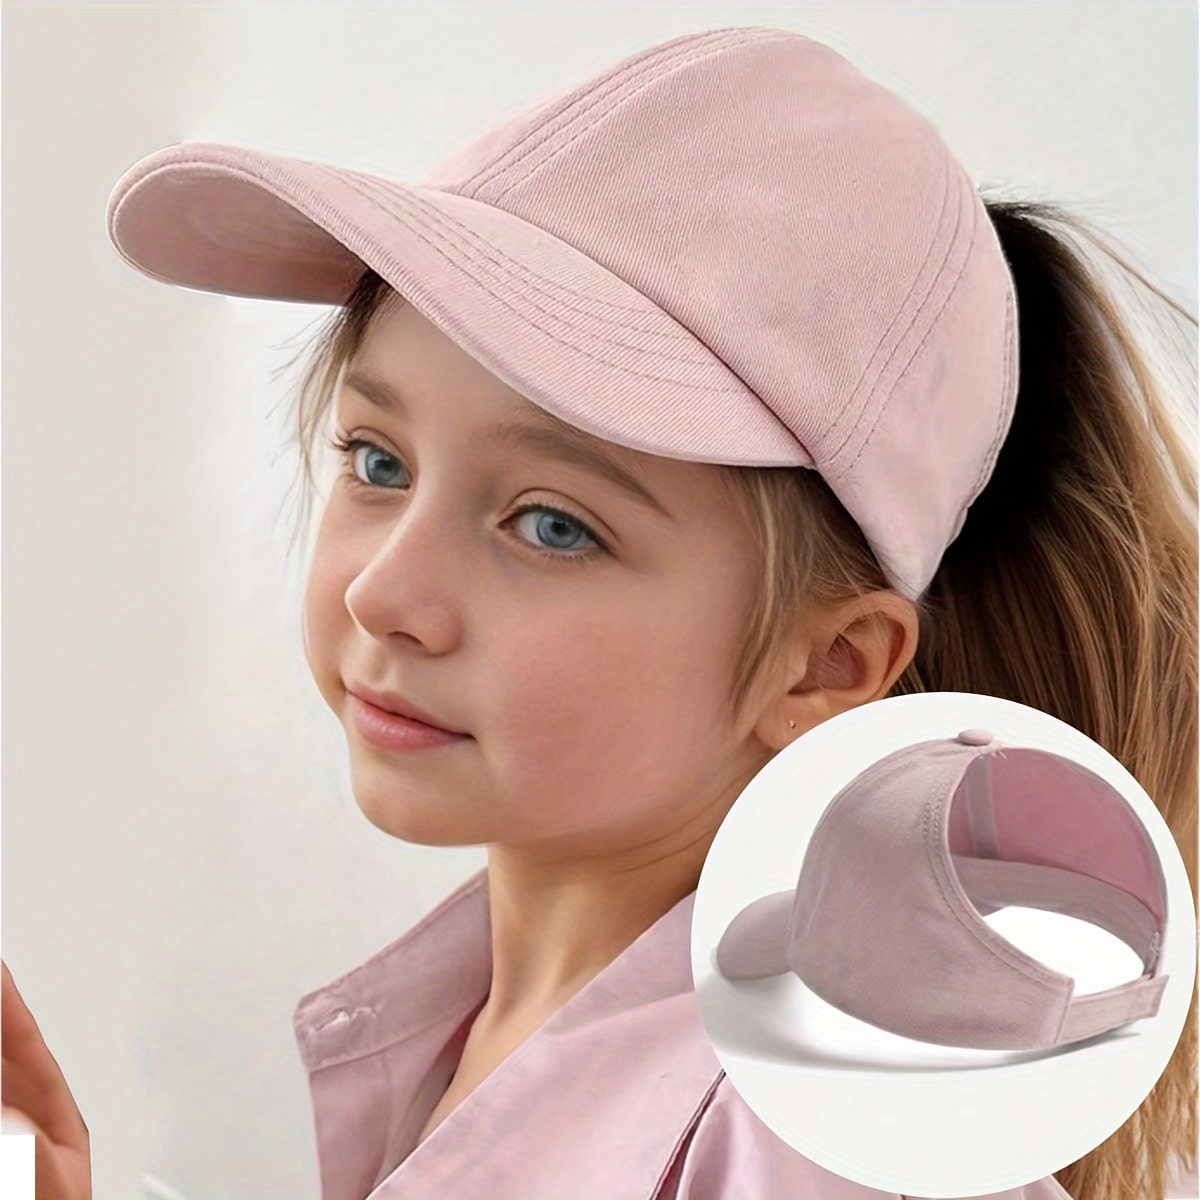 

Kids Summer Solid Color Ponytail Baseball Cap, Adjustable Uv Protection Lightweight Duckbill Hat, Ideal For Daily Wear, Outdoor Activities, For Ages 3-6y